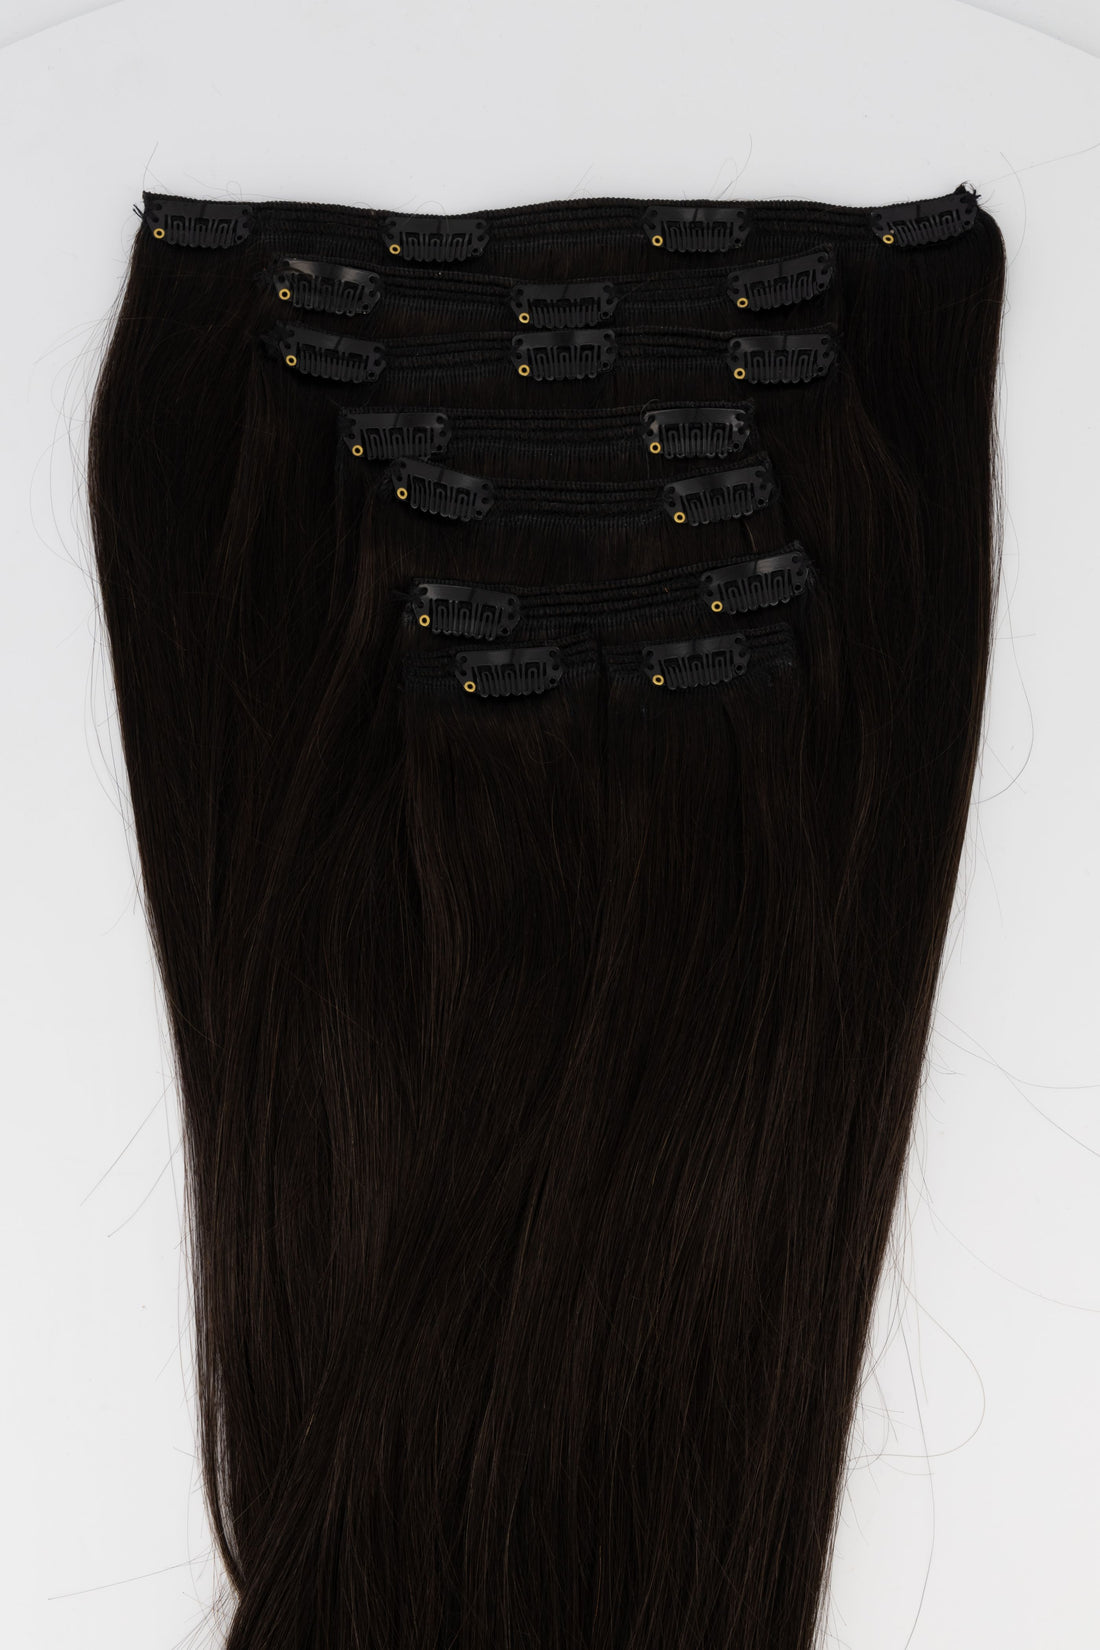 Frontrow clip-in hair extensions in brown black